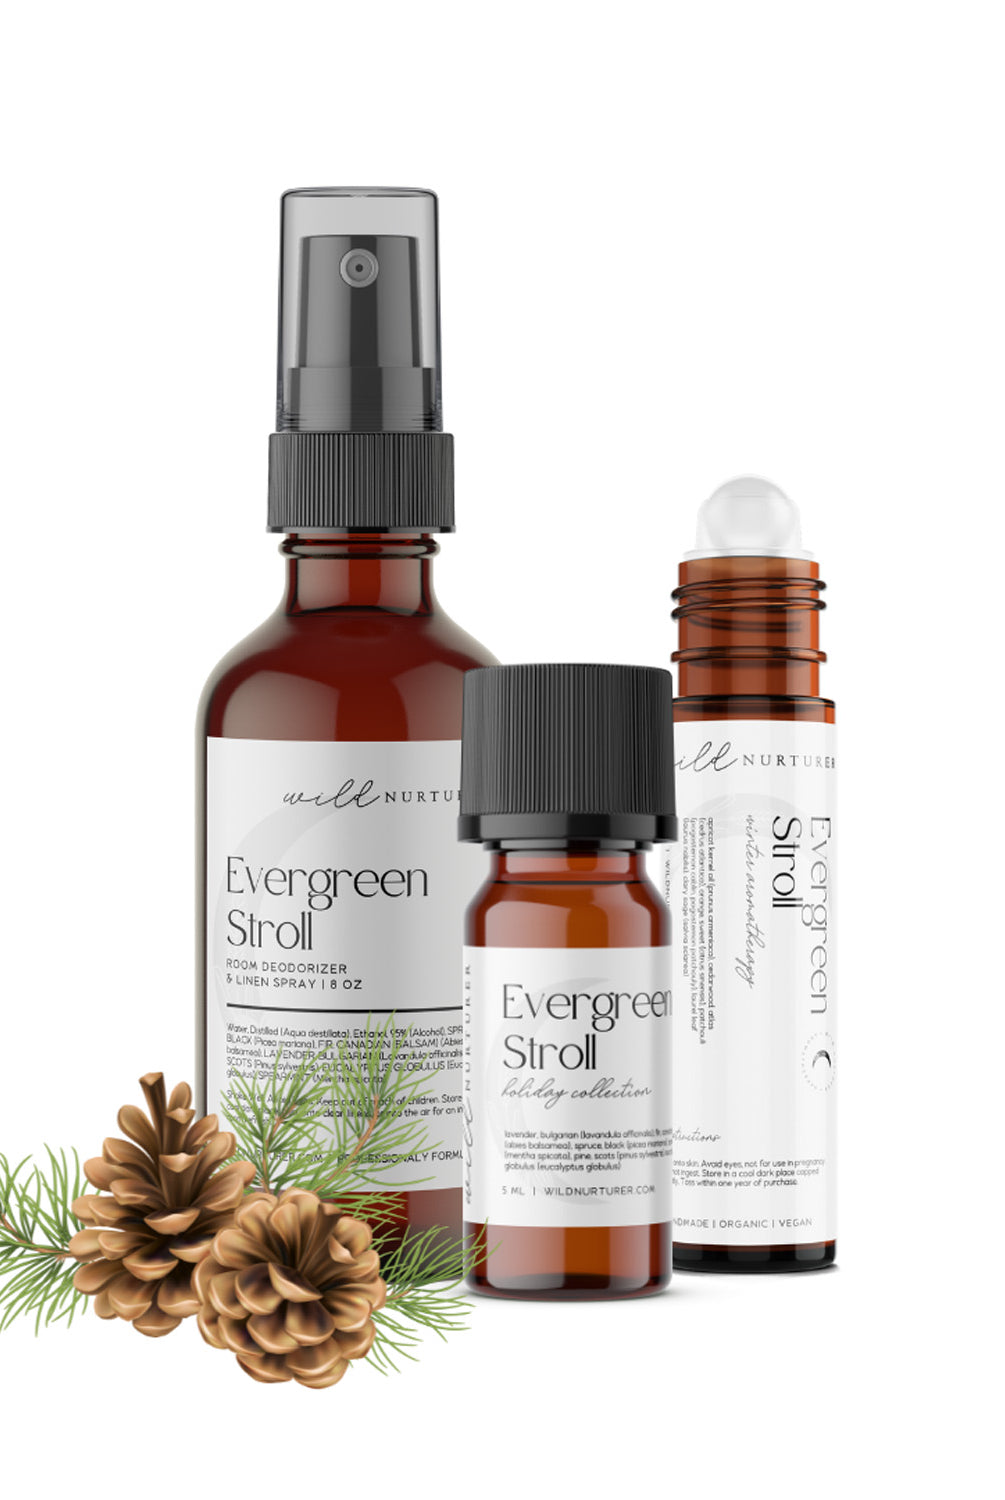 Three Evergreen Stroll - Winter Perfumery Diffuser Blend products from Wild Nurturer Aromatherapy, including a spray bottle and two small bottles, accompanied by pine cones and pine needles on a white background.